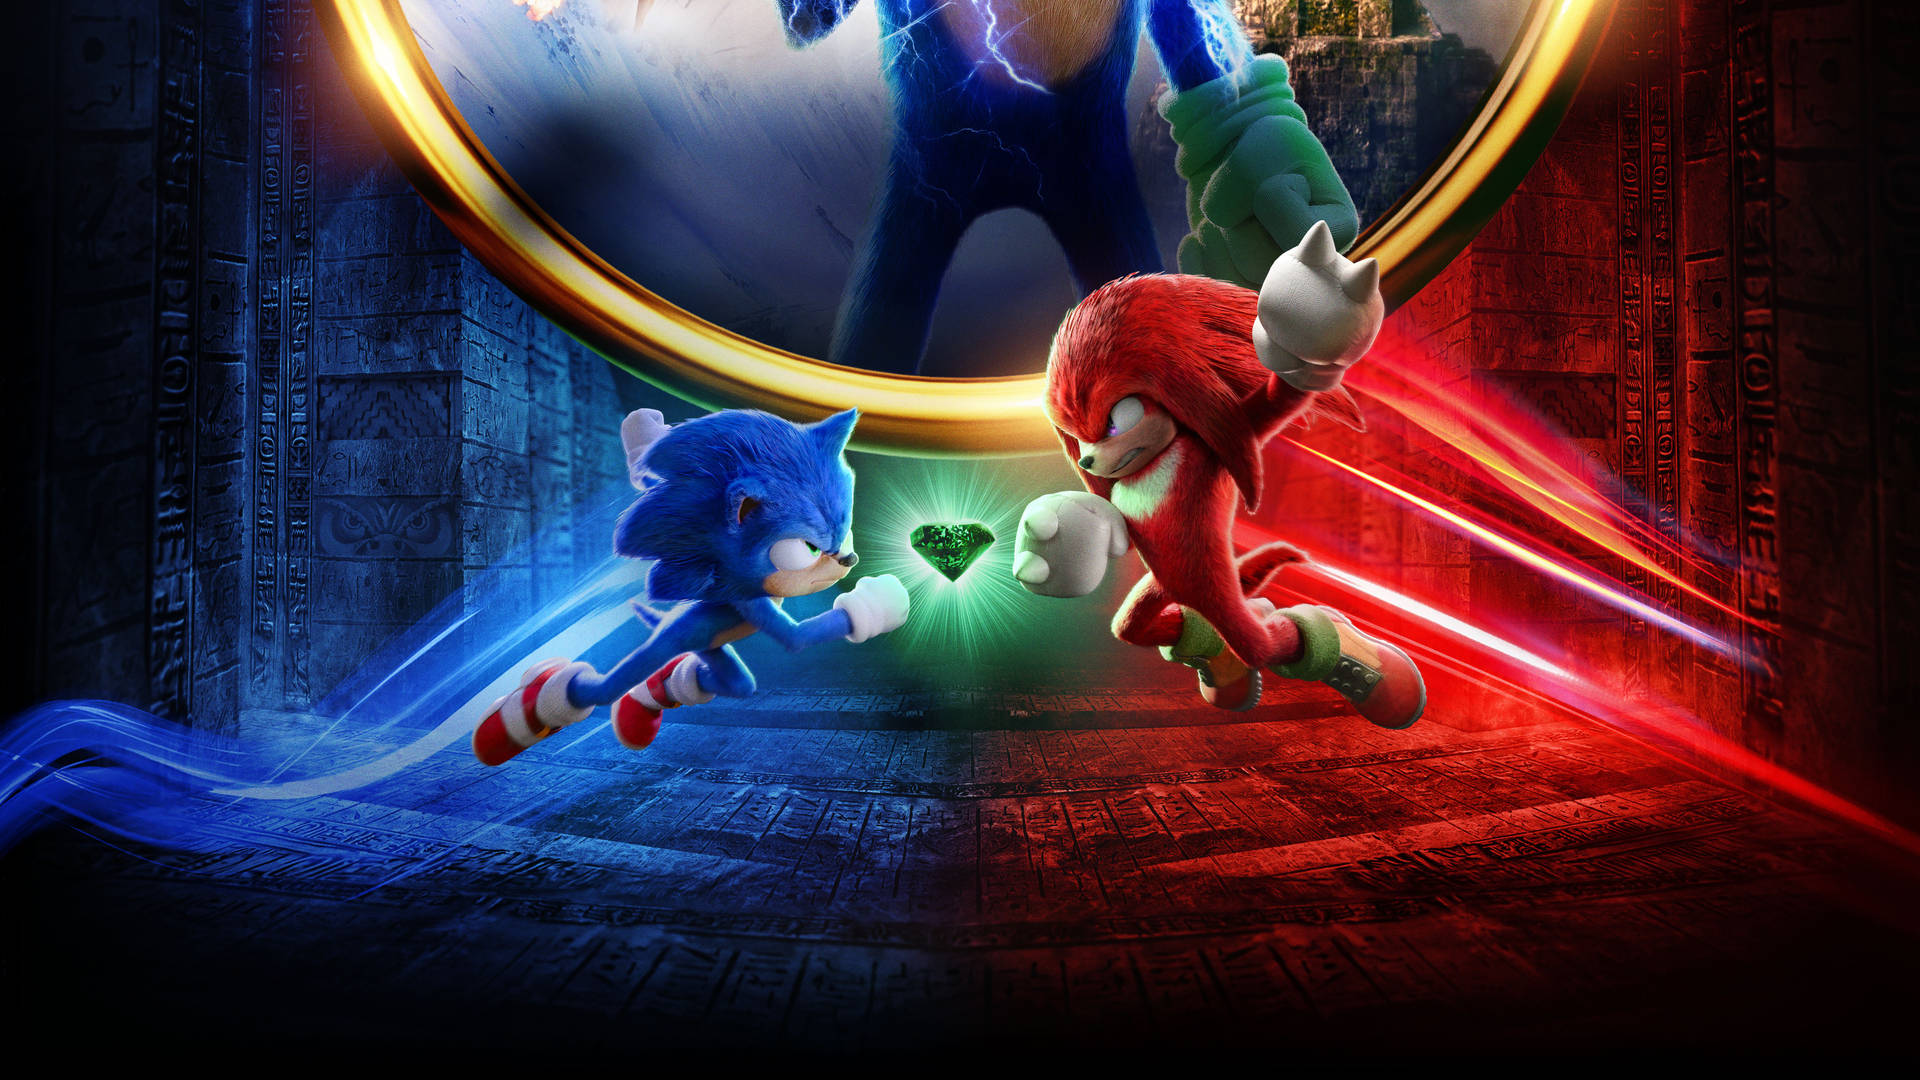 Mighty Guardian - Knuckles The Echidna in Action Wallpaper